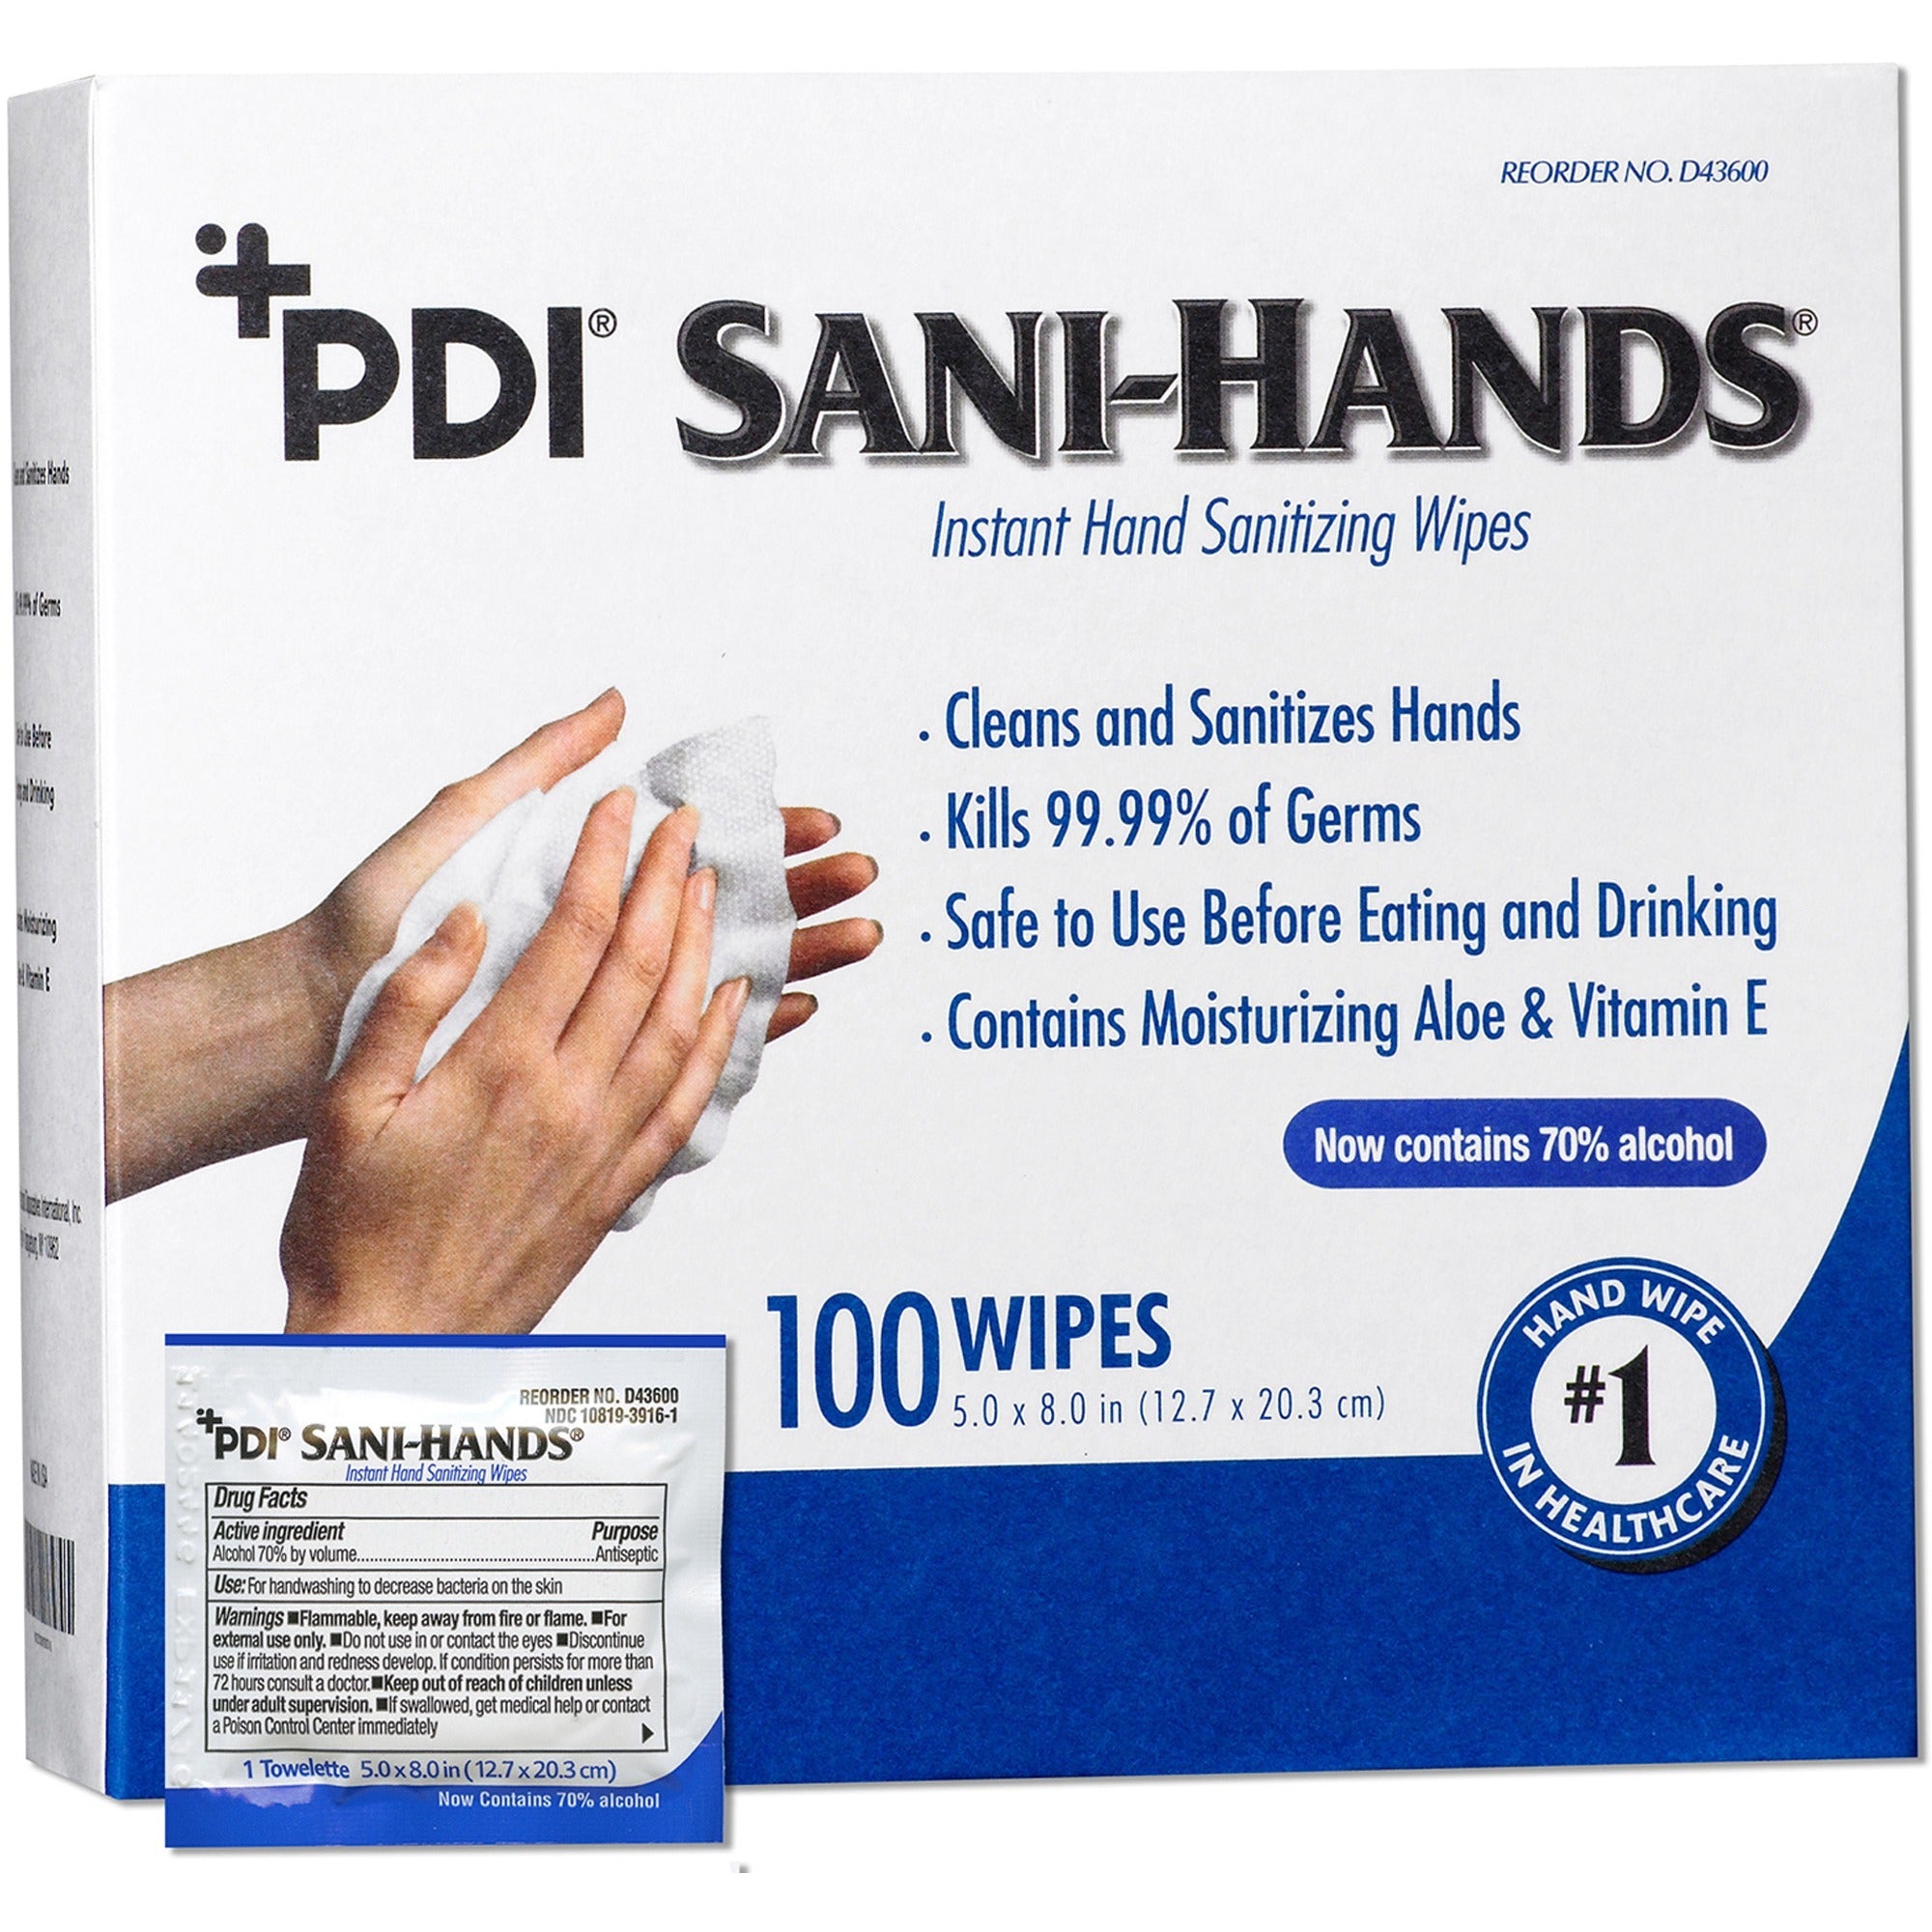 pdi-sani-hands-instant-hand-sanitizing-wipes-antimicrobial-anti-septic-dye-free-fragrance-free-hygienic-resealable-for-hand-100-box_pdid43600 - 1